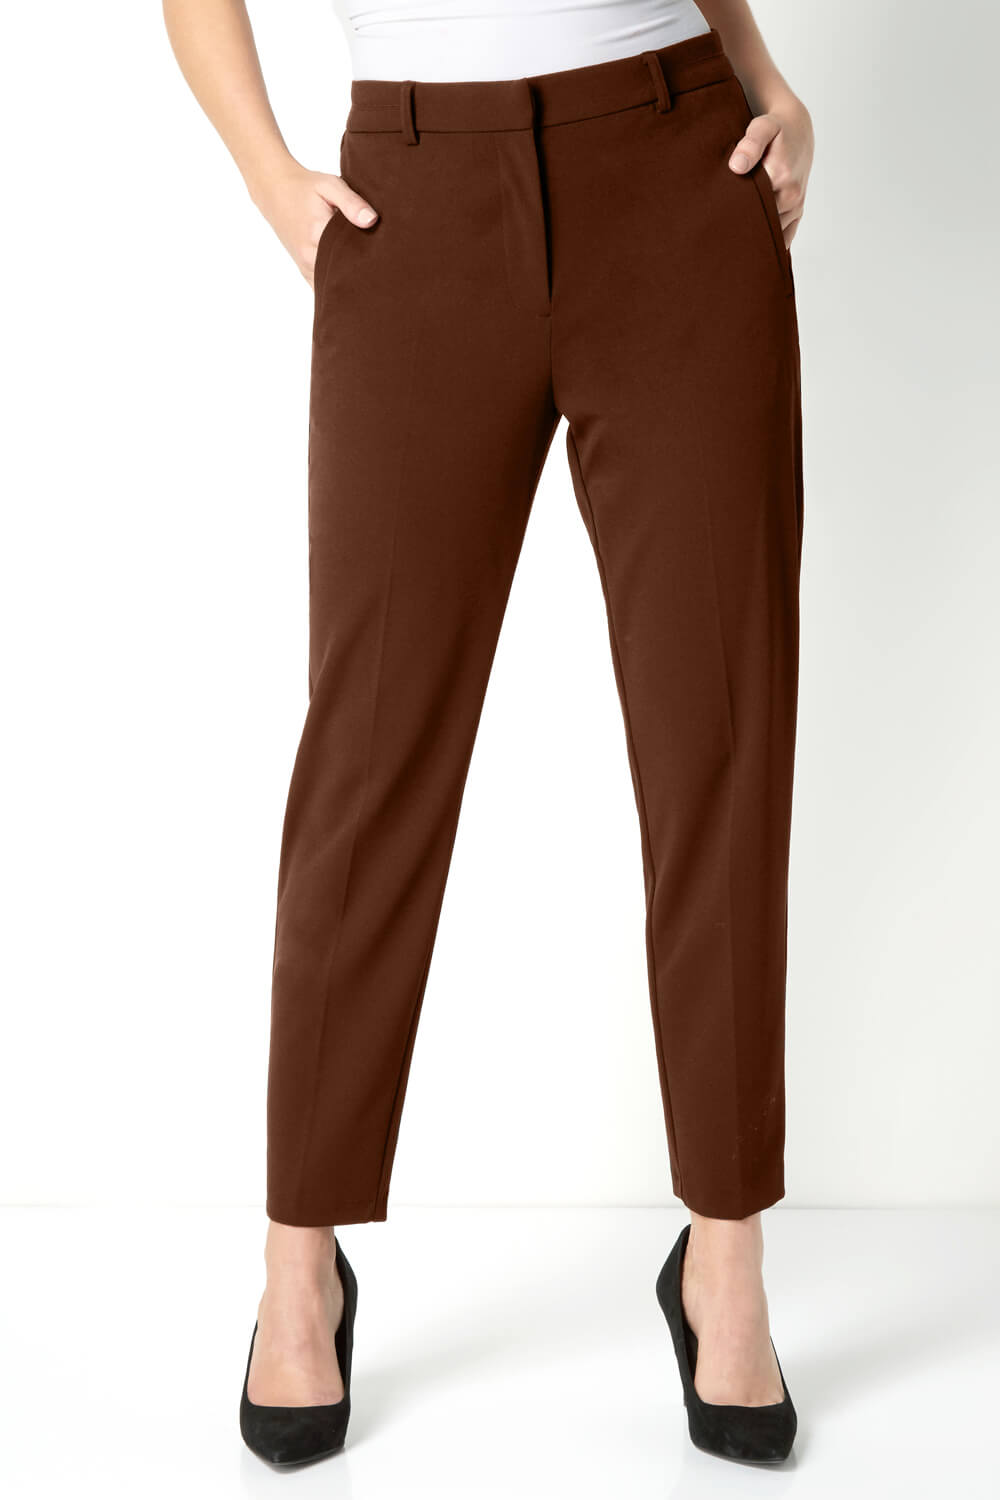 Chocolate Long Straight Leg Stretch Trouser, Image 3 of 3